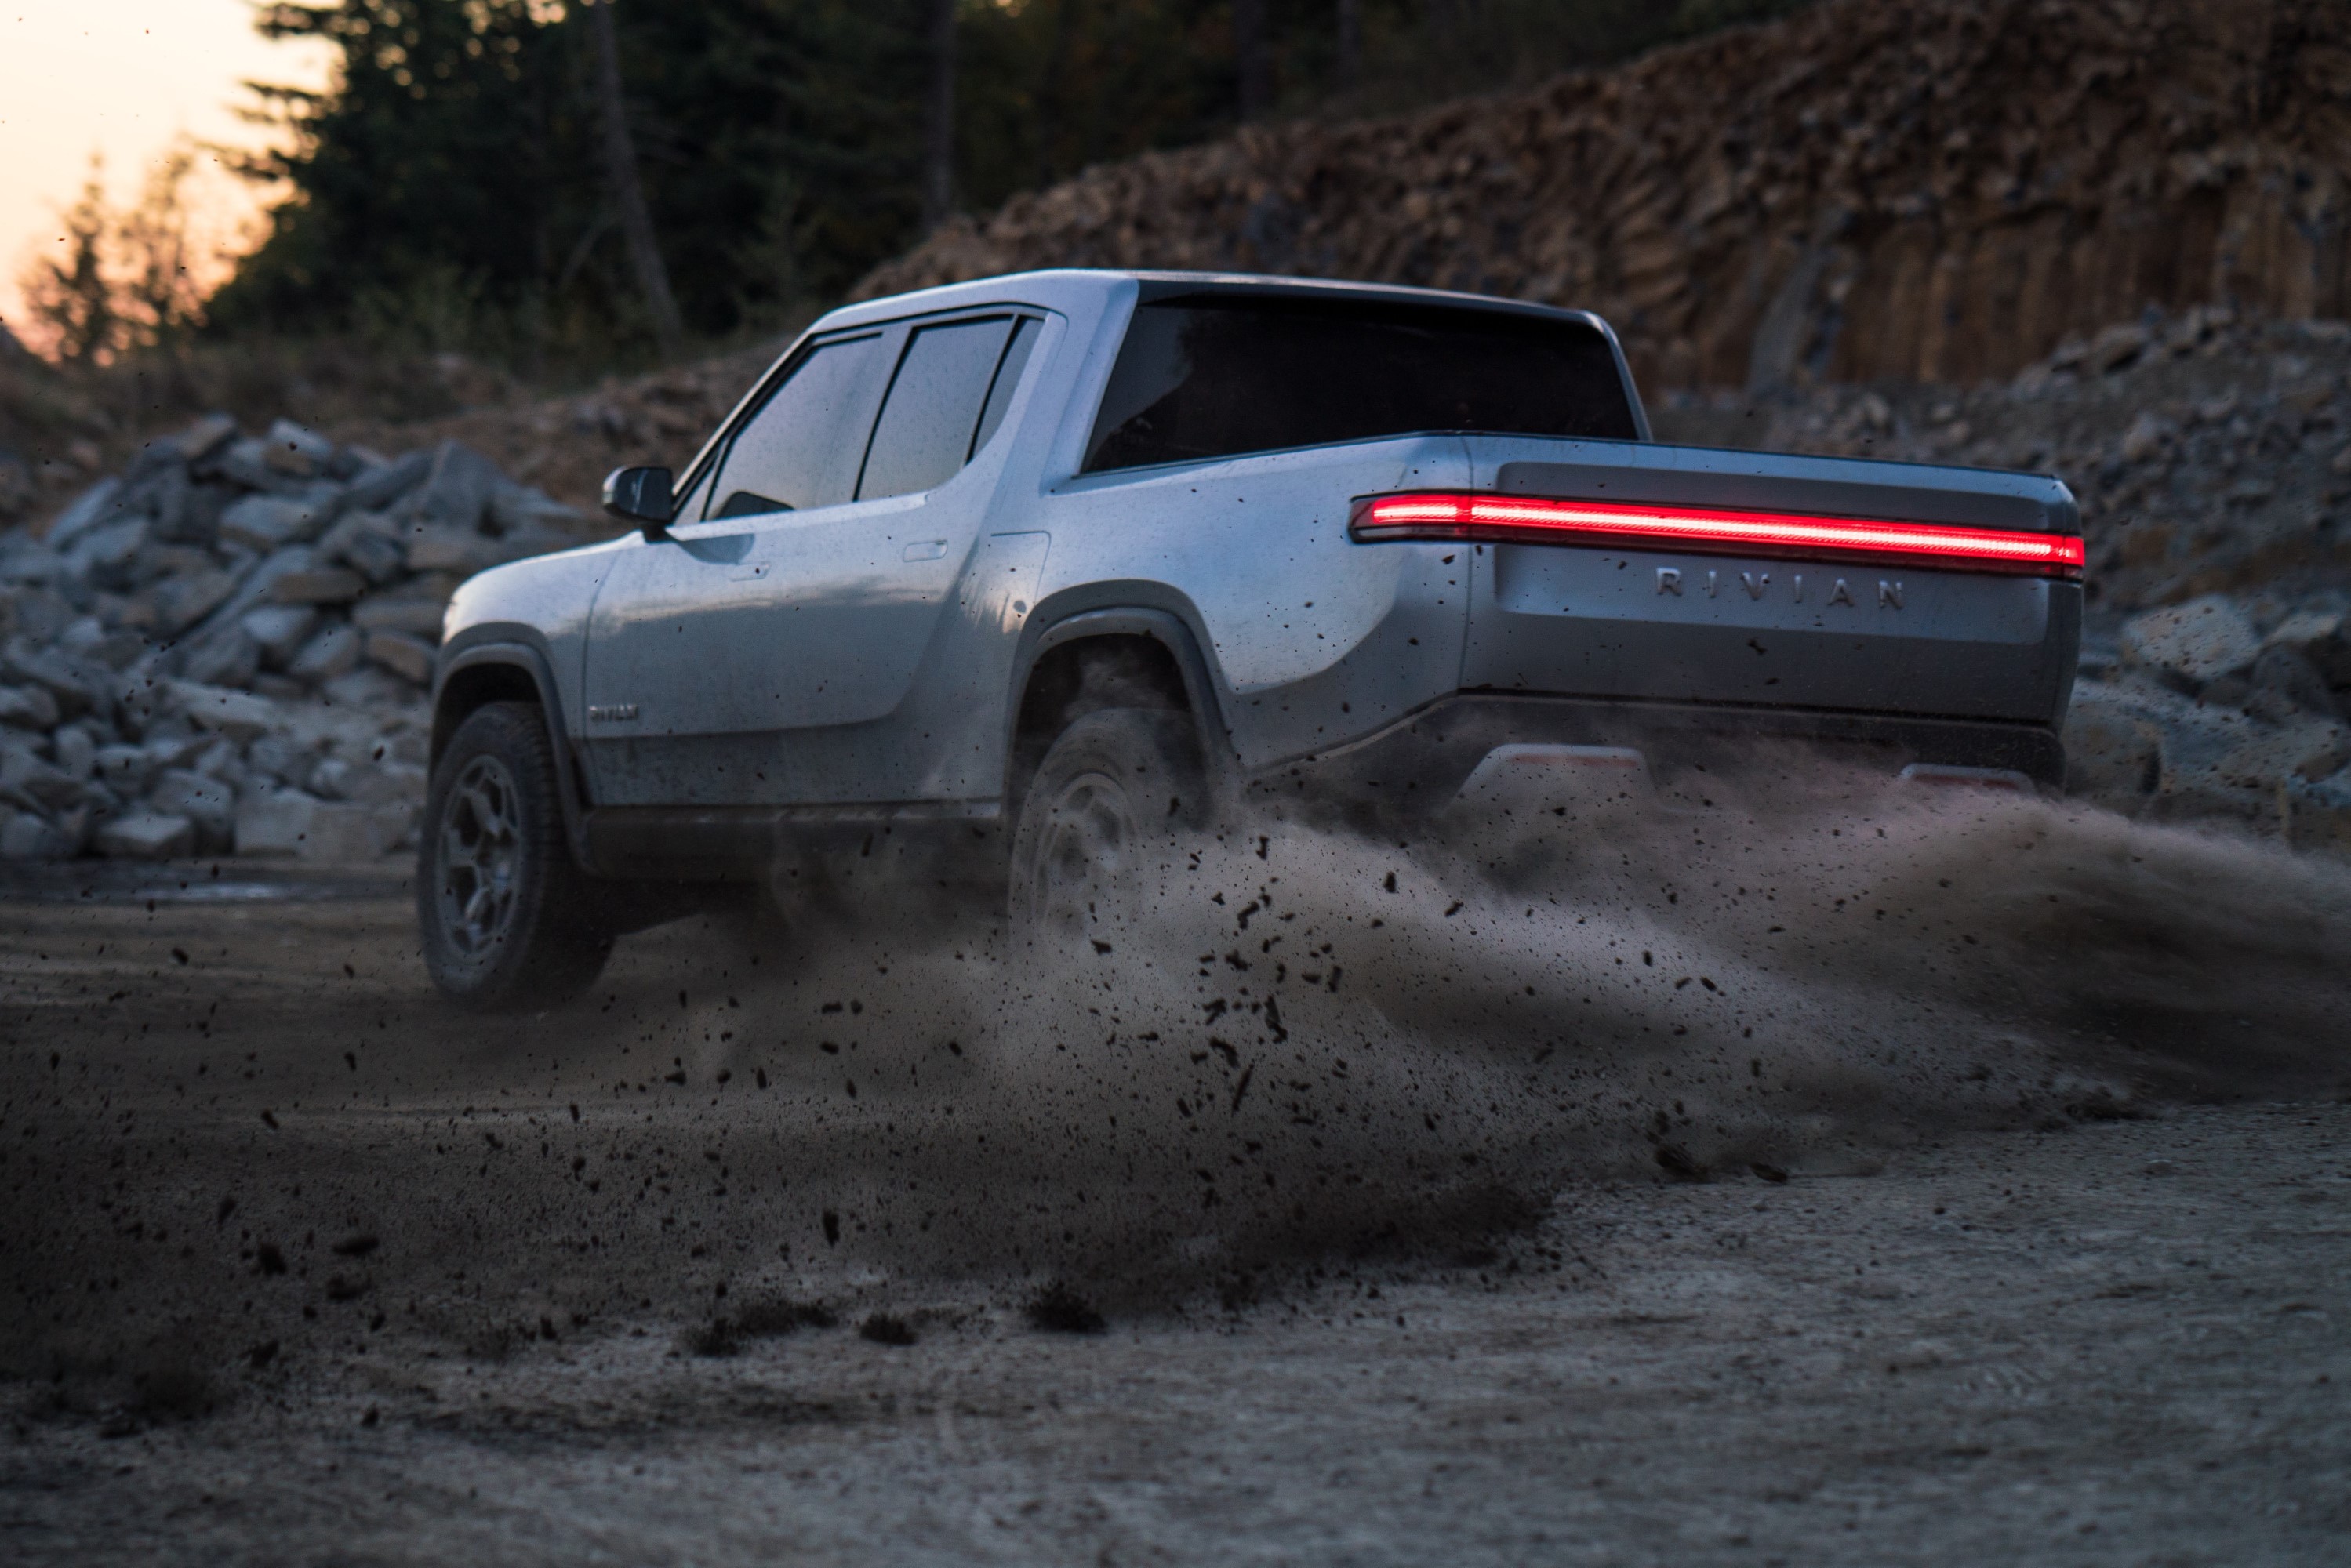 Rivian’s battery-powered RT1 pickup goes 0-60 in 3 seconds, is designed with storage in mind